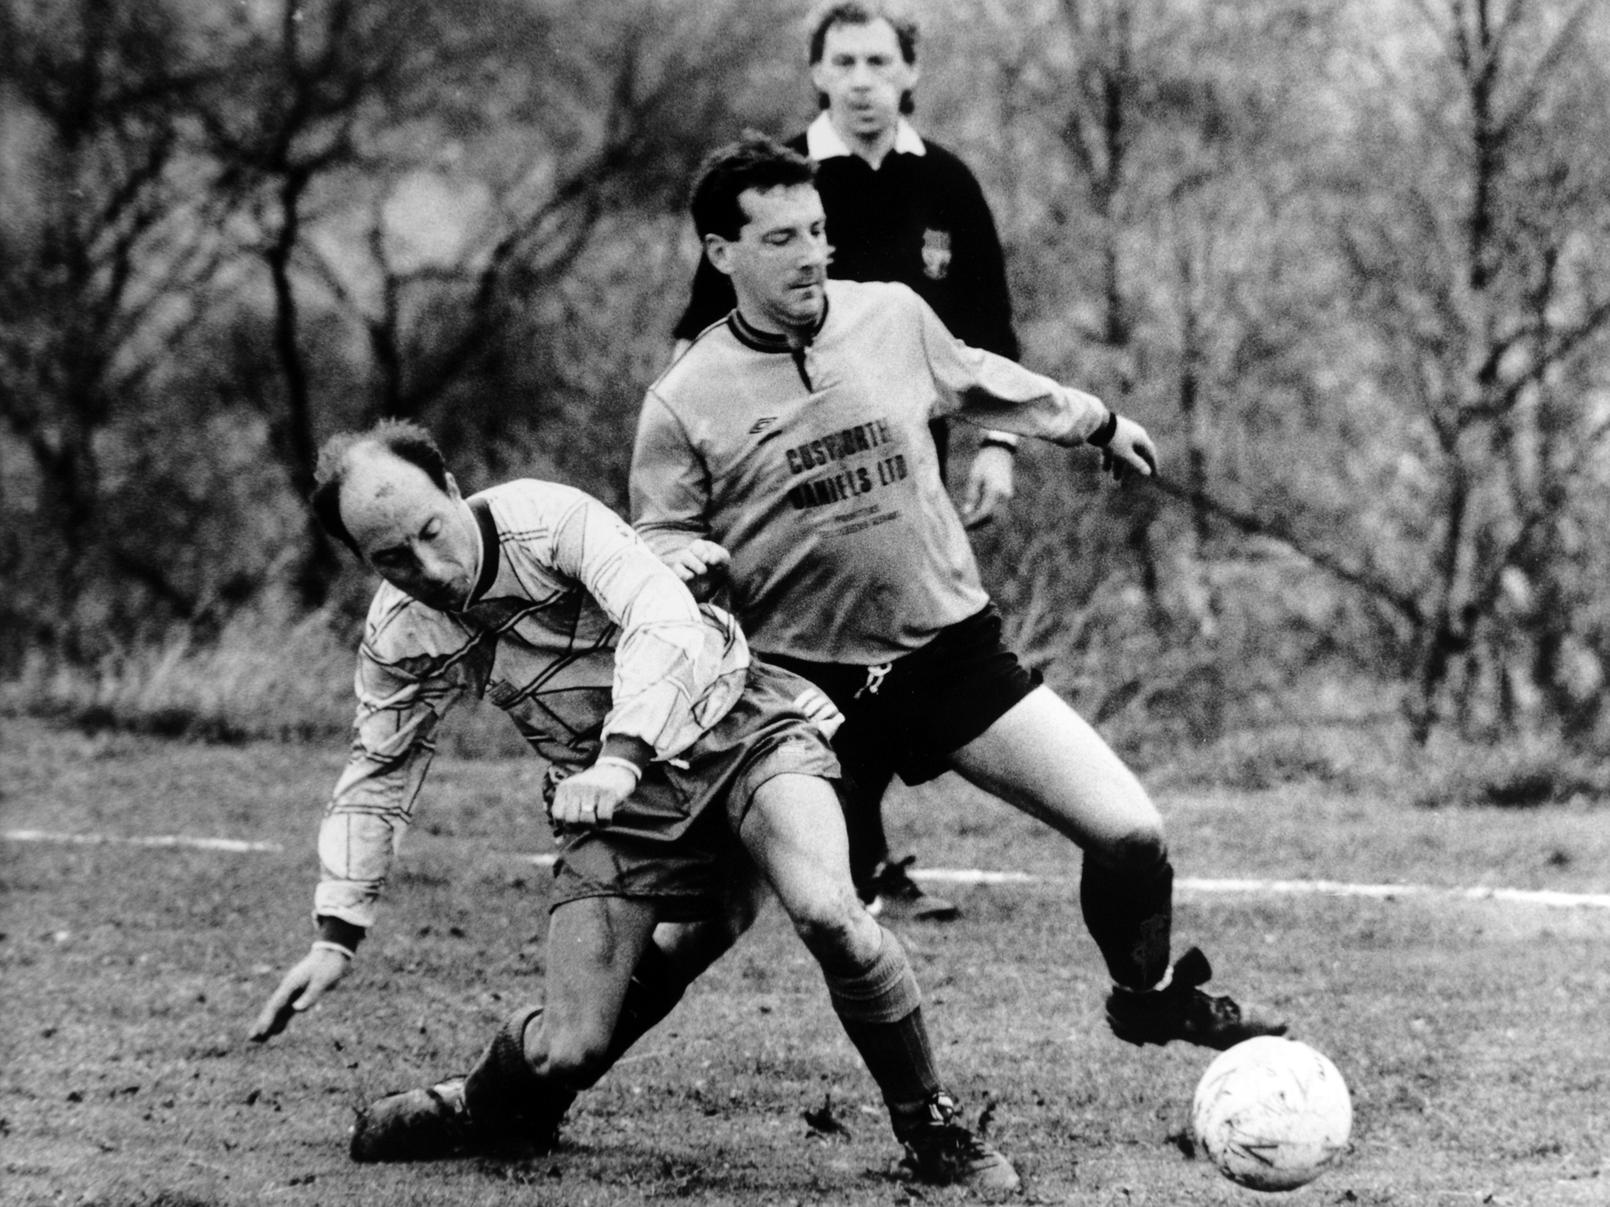 Graham Moles (left) of Pudsey White Horse and Ralph Mortimer of Belle Isle, fight for possession.